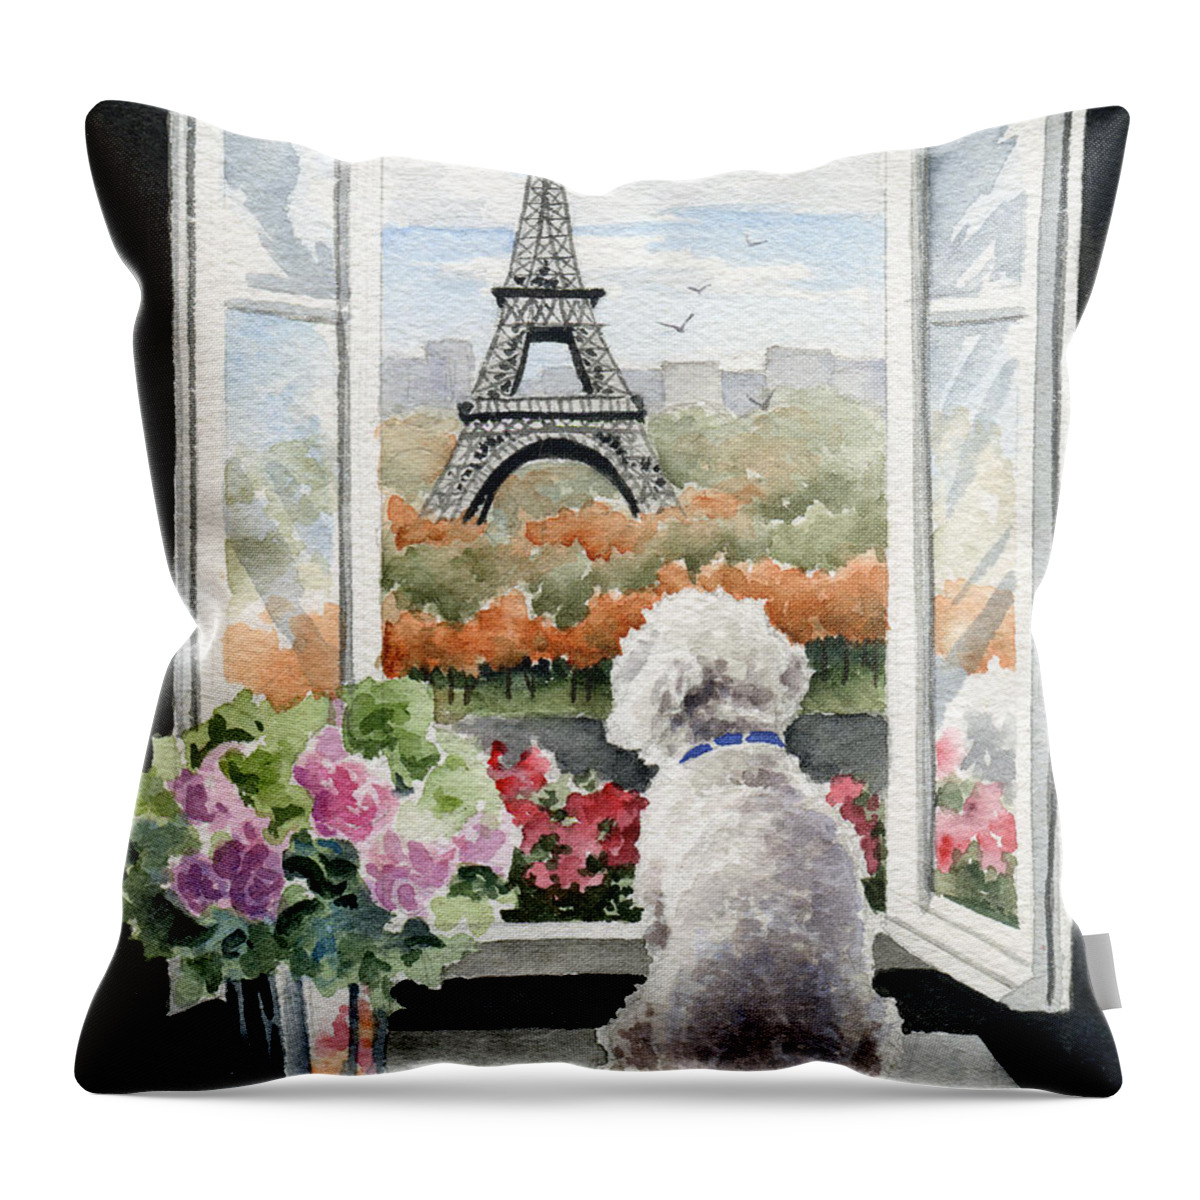 Bichon Throw Pillow featuring the painting Bichon Frise In Paris by David Rogers